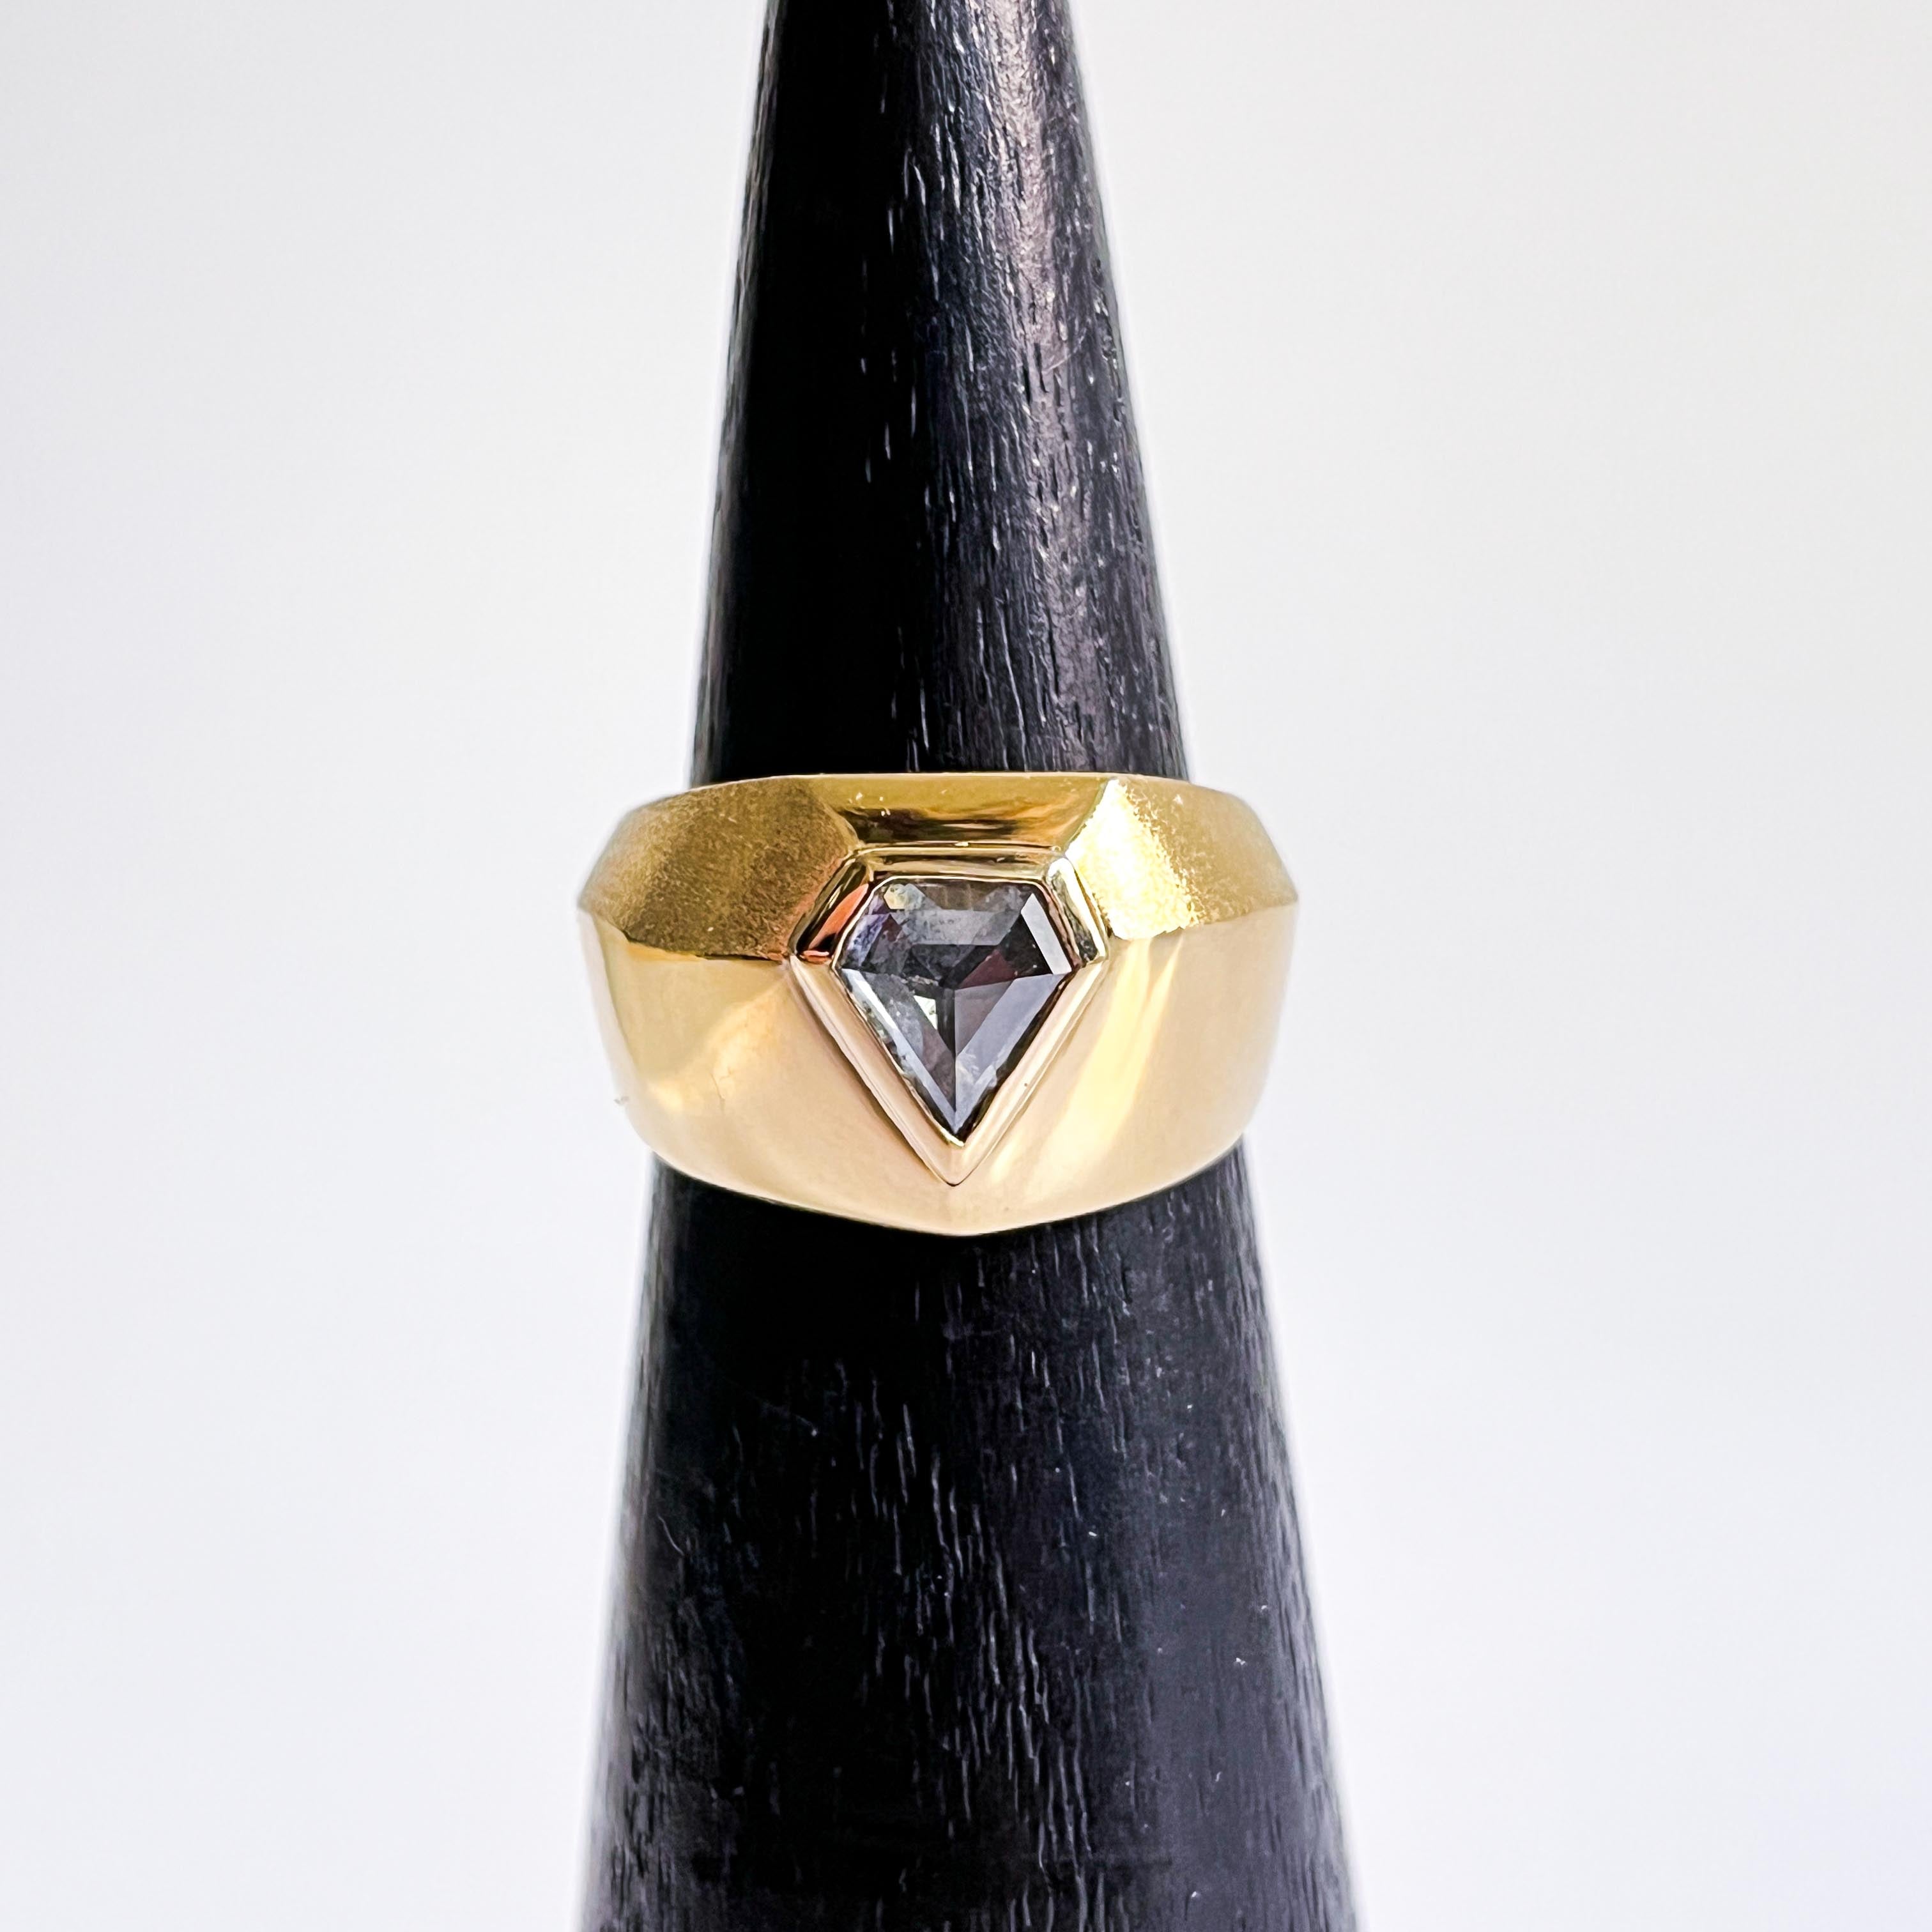 NATHAN: Yellow Gold Shield Cut Salt and Pepper Ring